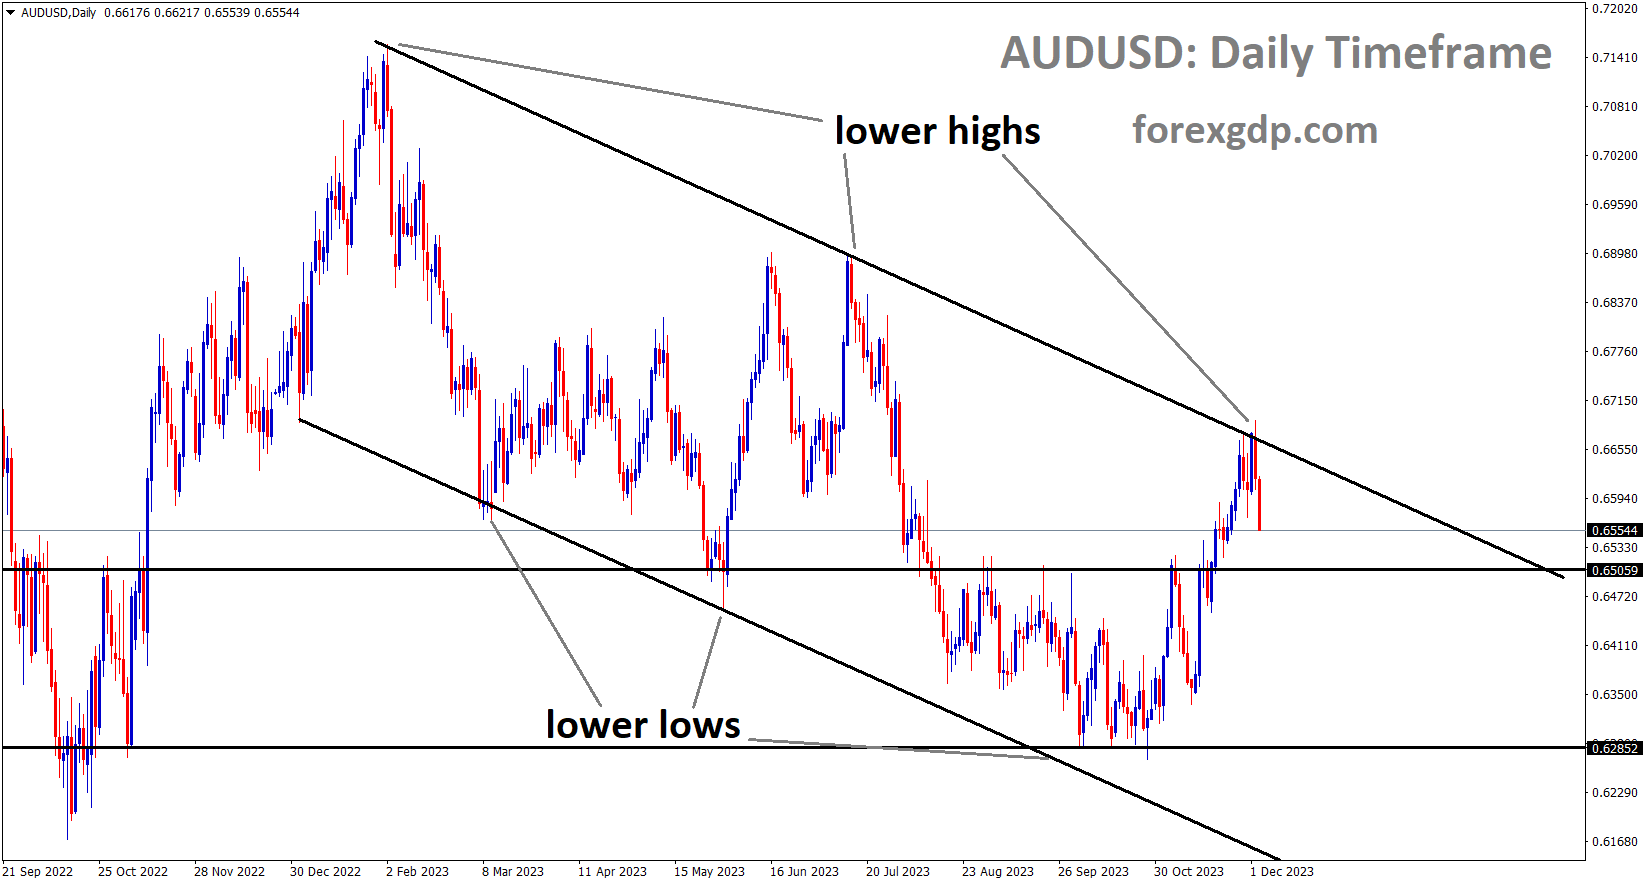 AUDUSD is moving in a descending channel and the market has reached the lower high area of the channel